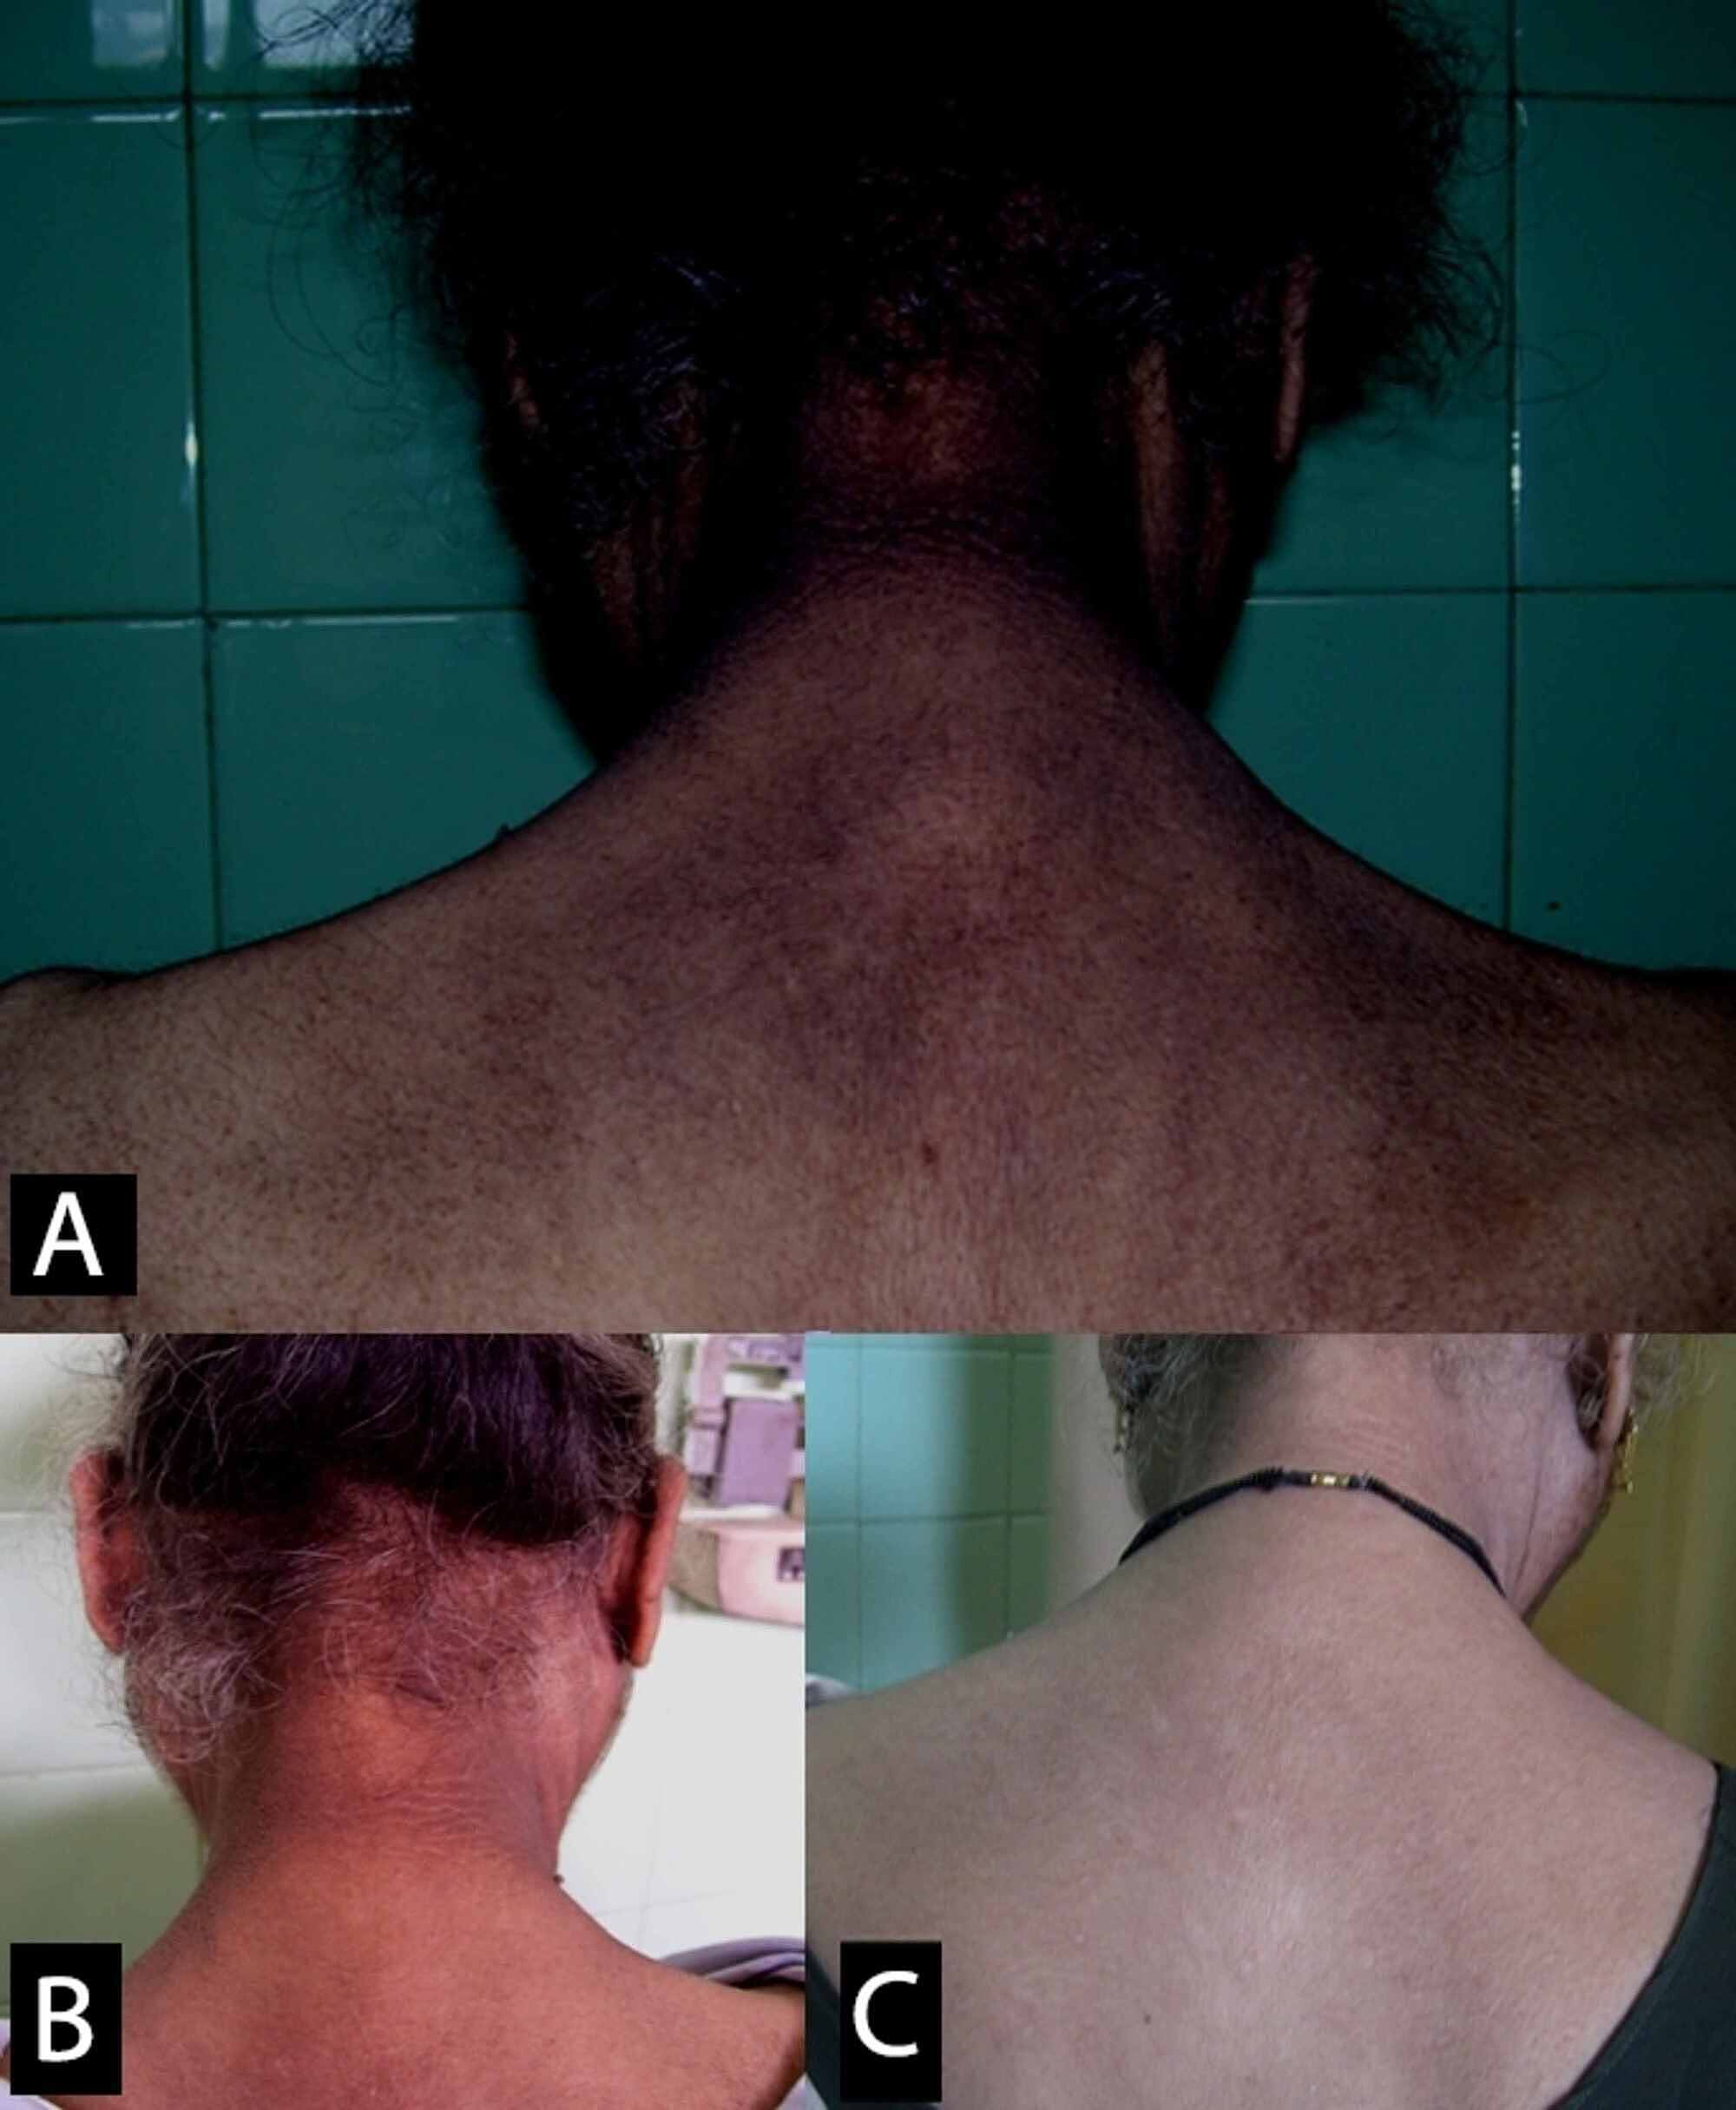 Treatment acanthosis nigricans Acanthosis Nigricans: